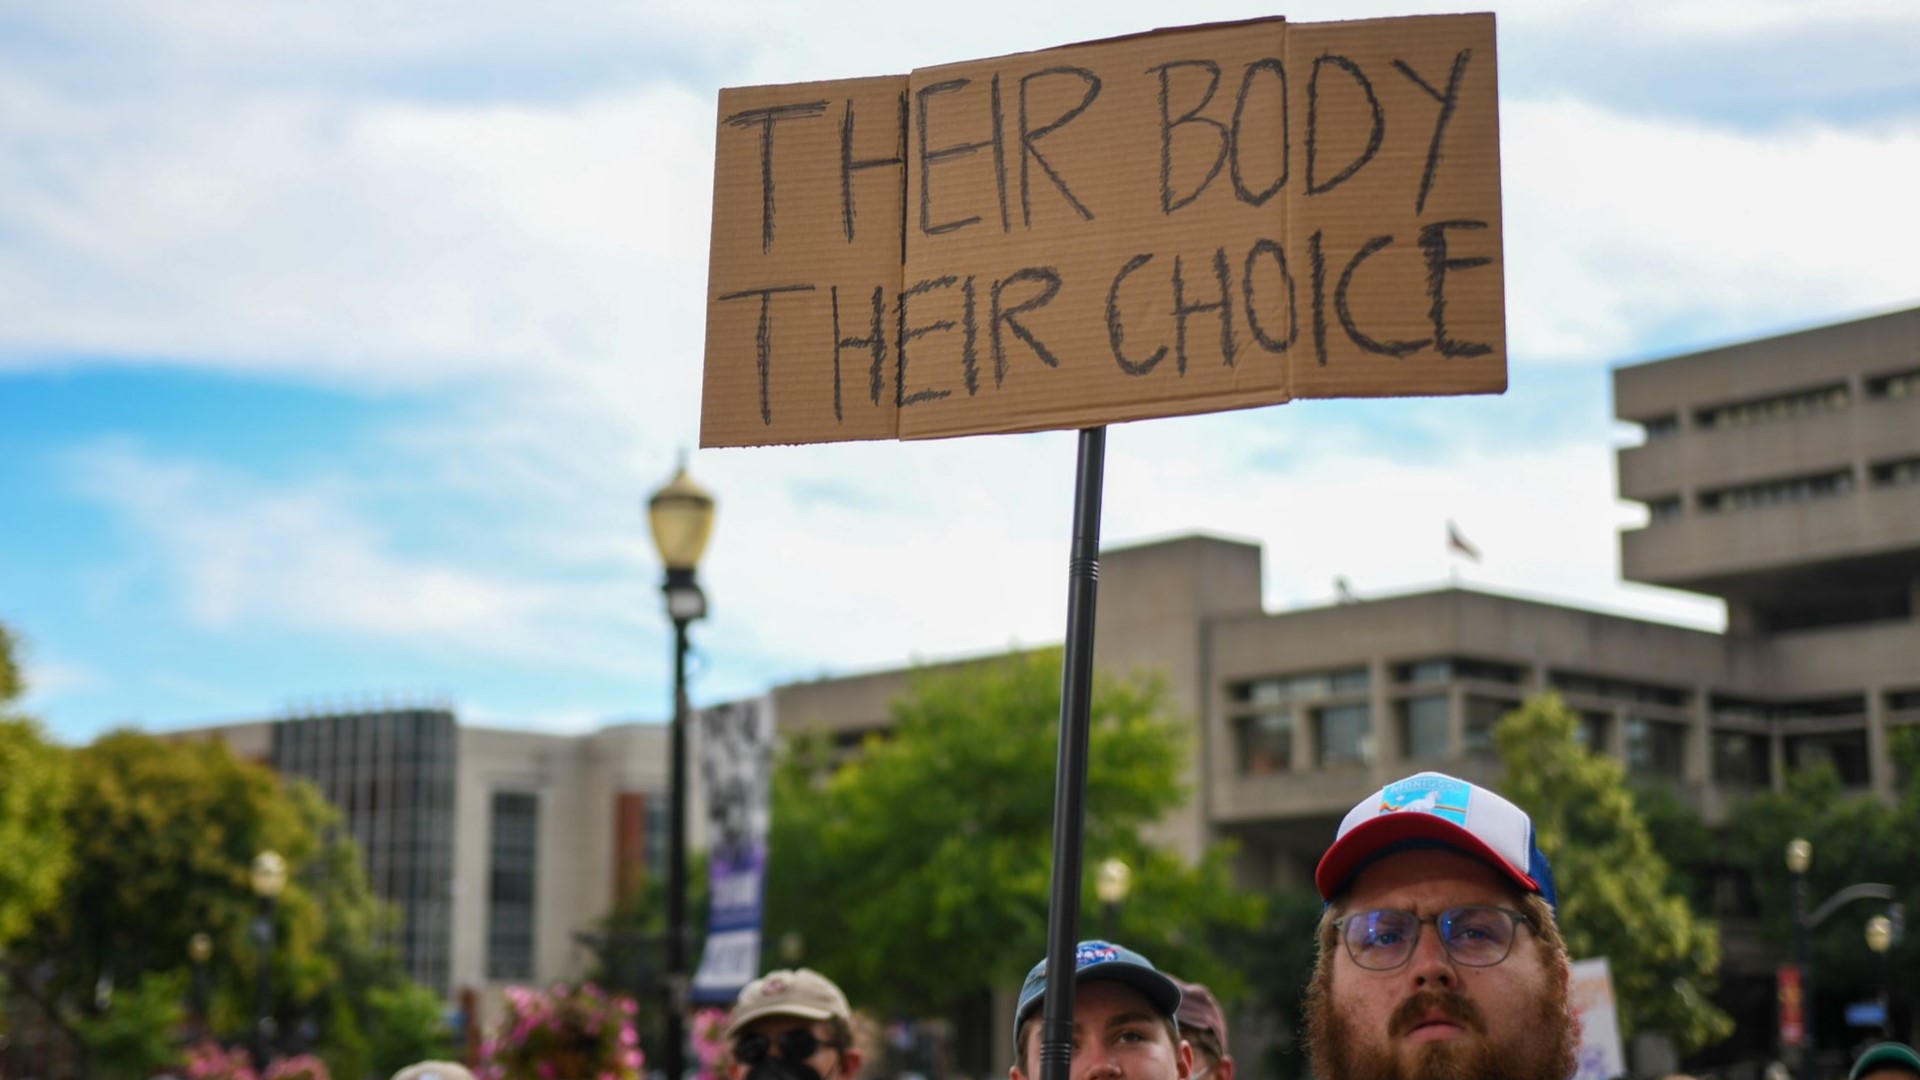 In Kentucky, a 2019 trigger law banning abortions across the commonwealth immediately went into effect. While abortion is legal in Indiana, changes may come soon.